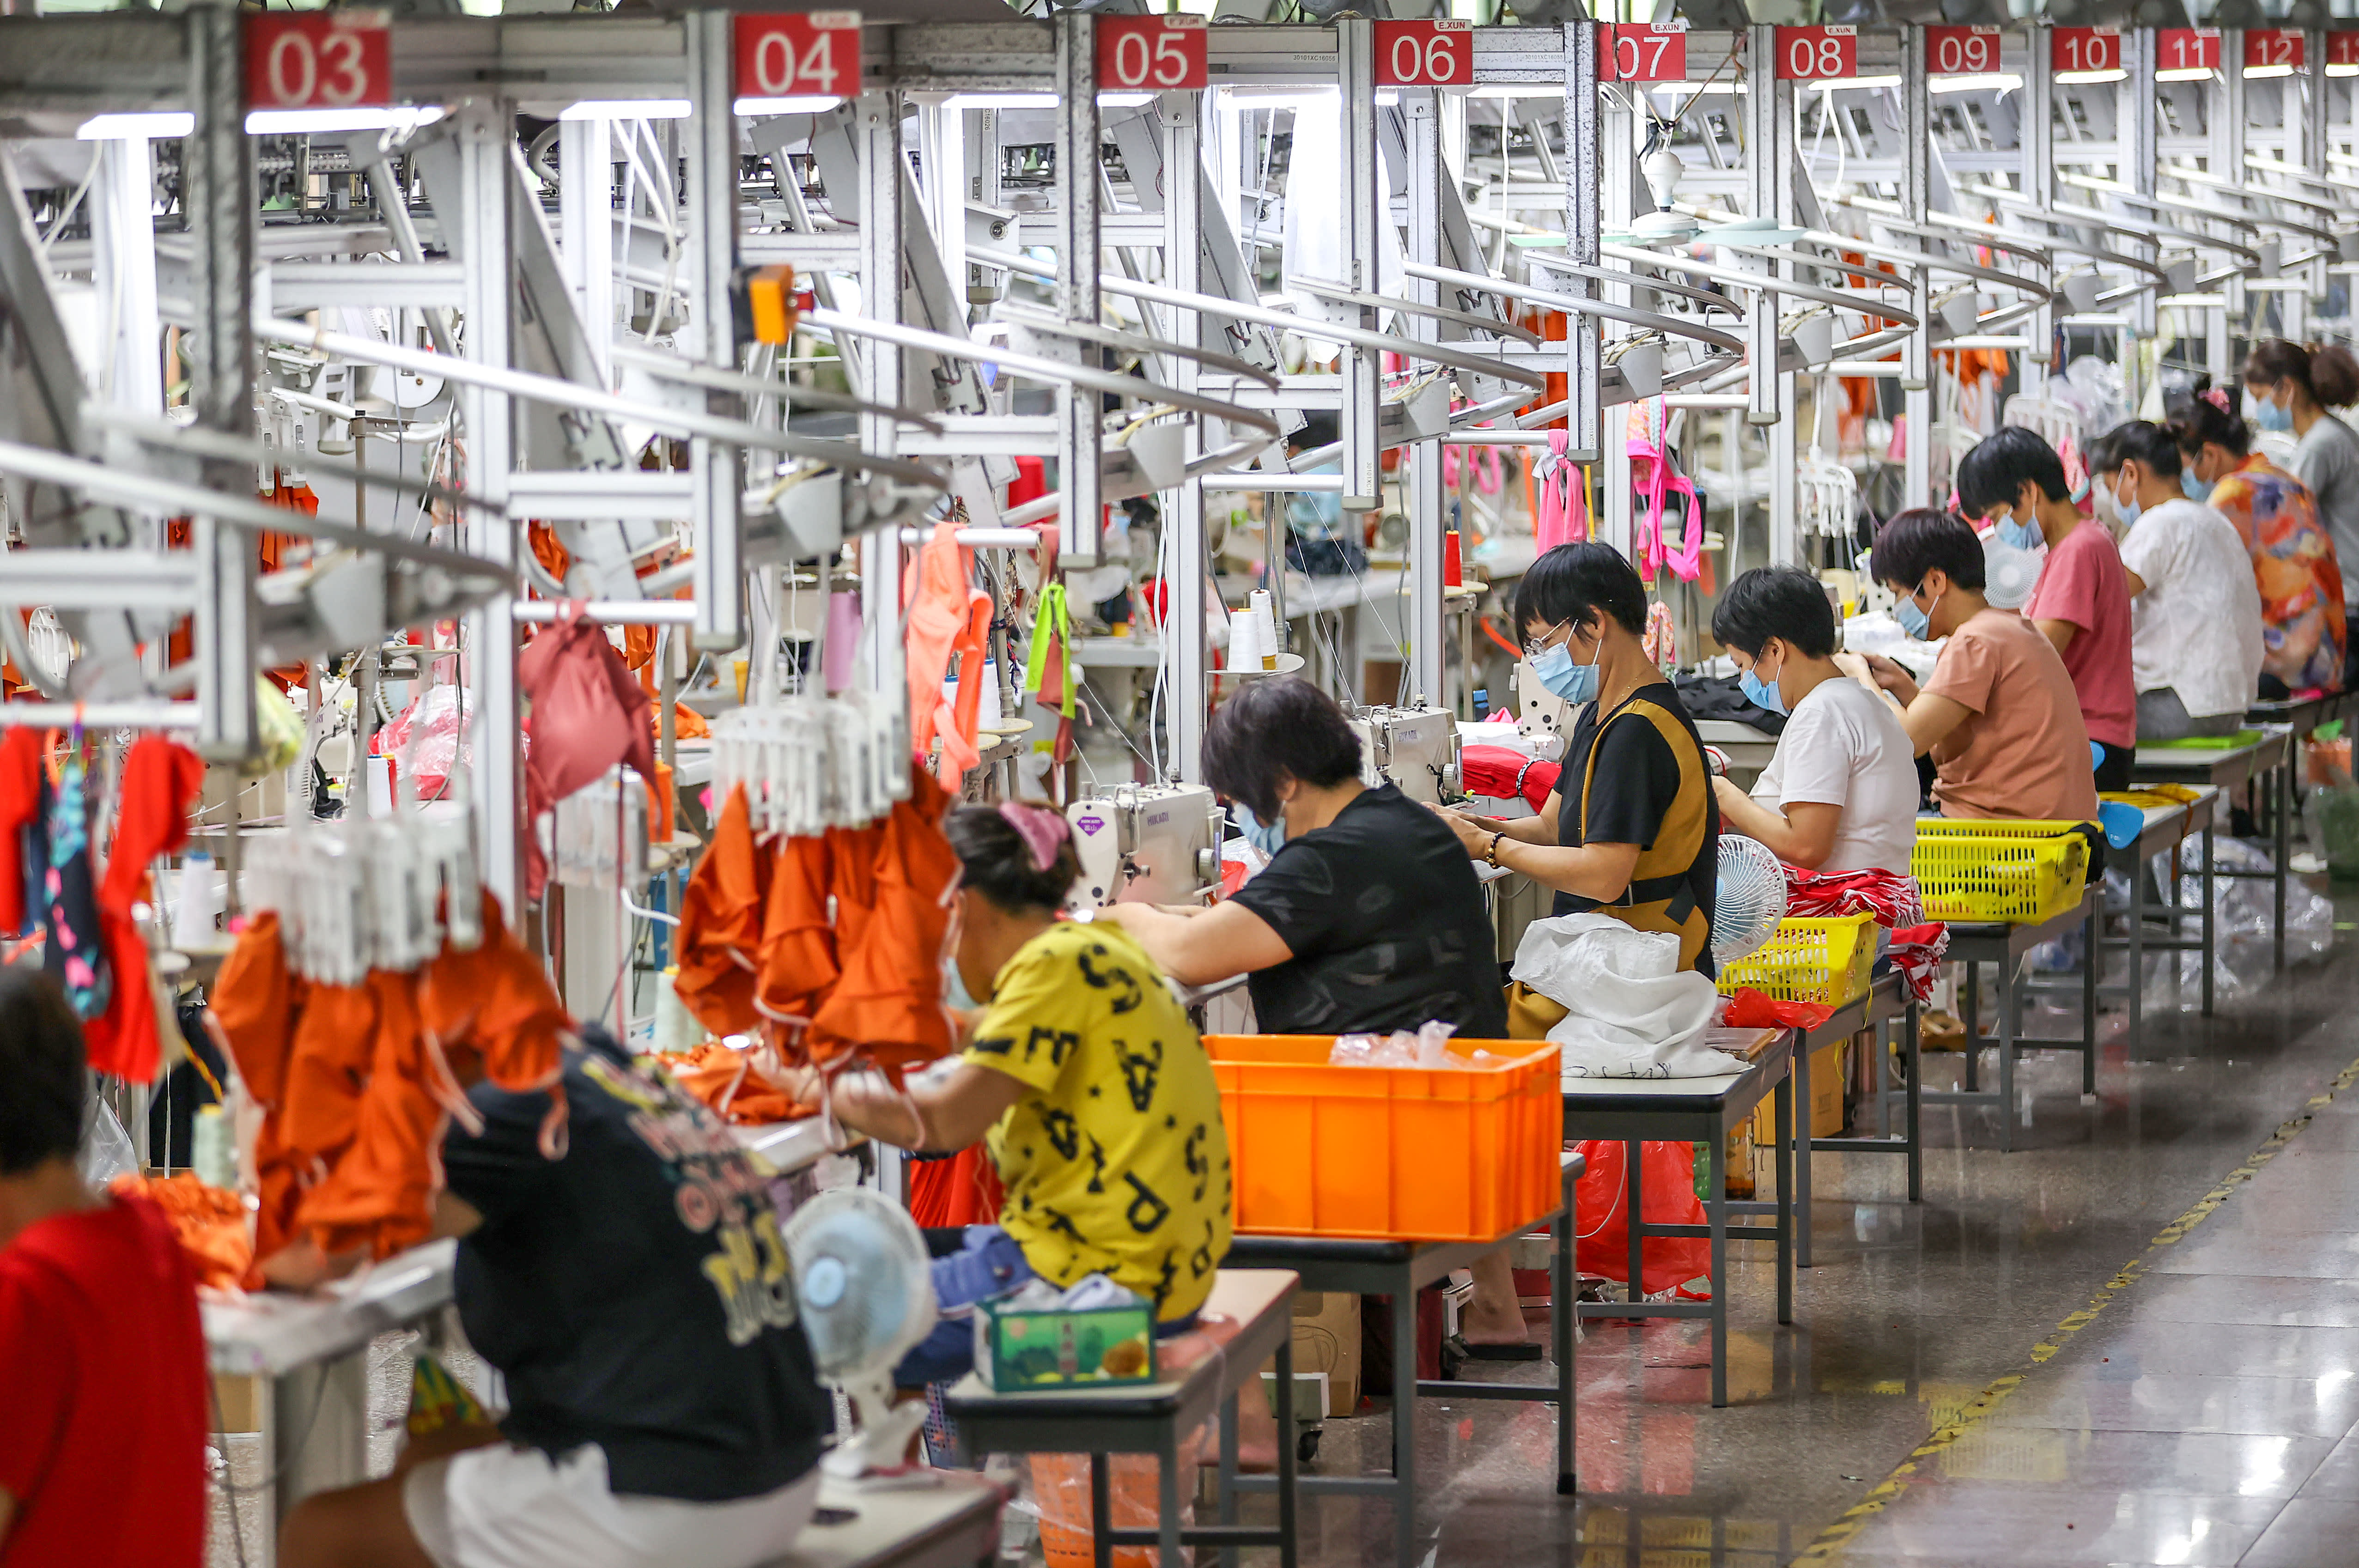 China’s economy is showing signs of stagflation, economists warn